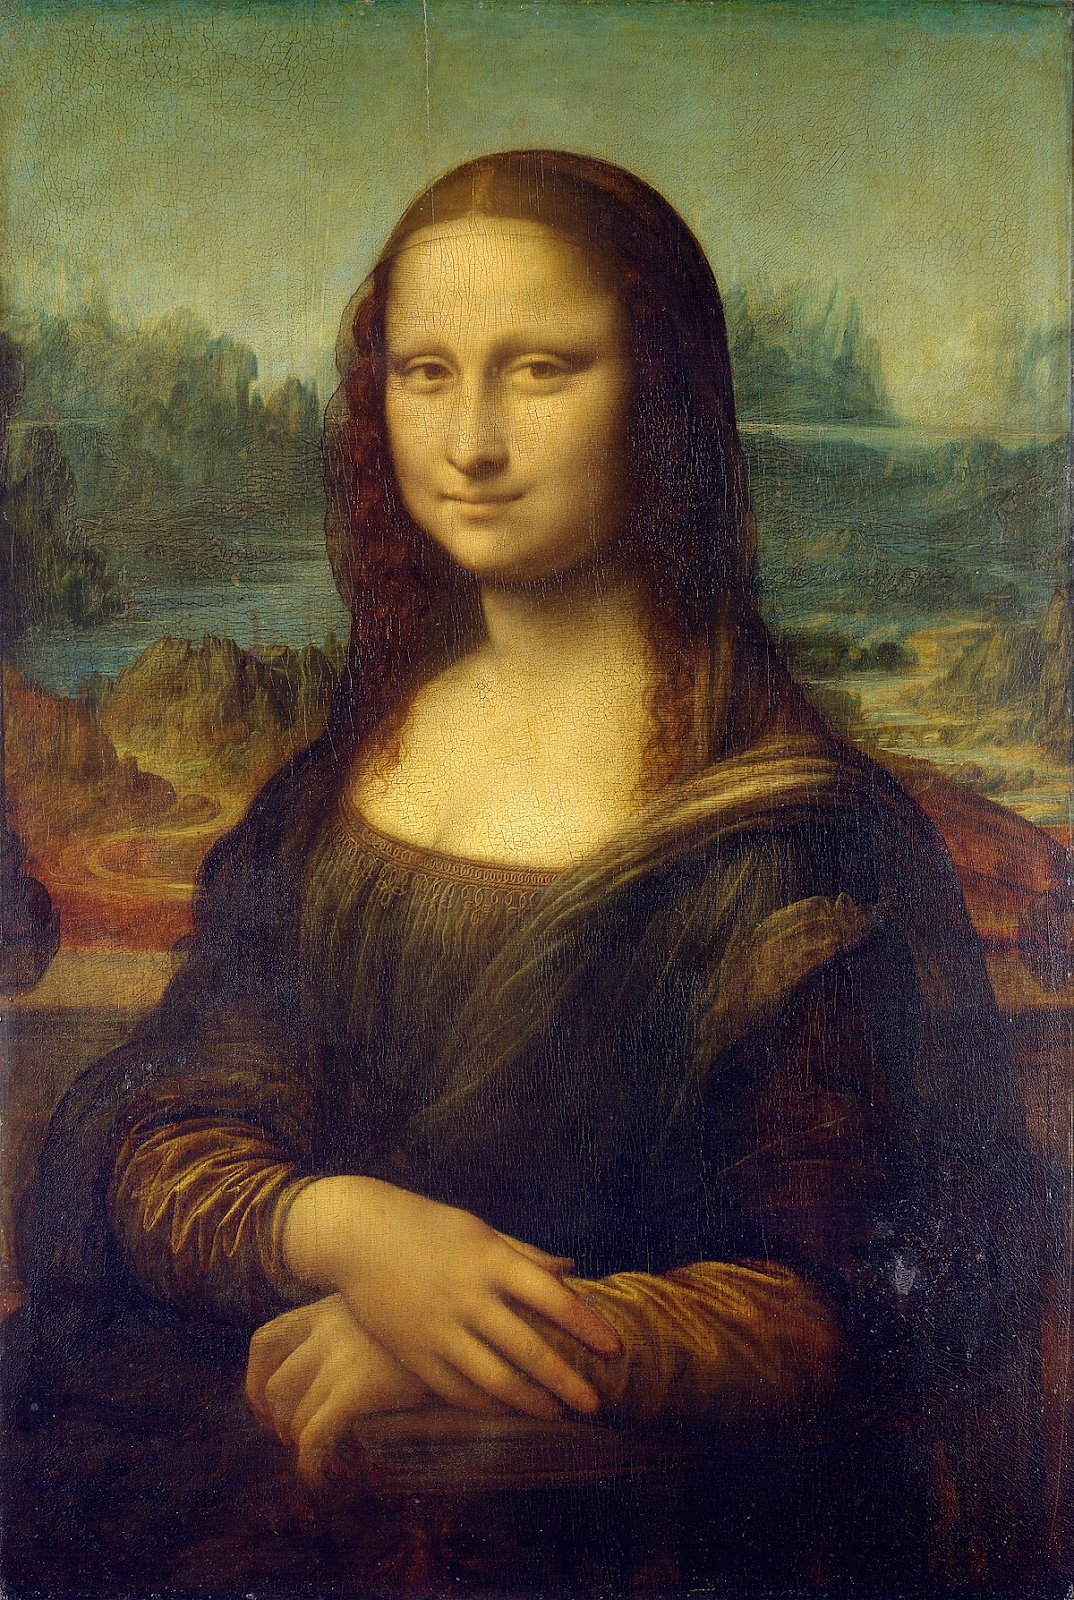 A picture of the Mona Lisa.